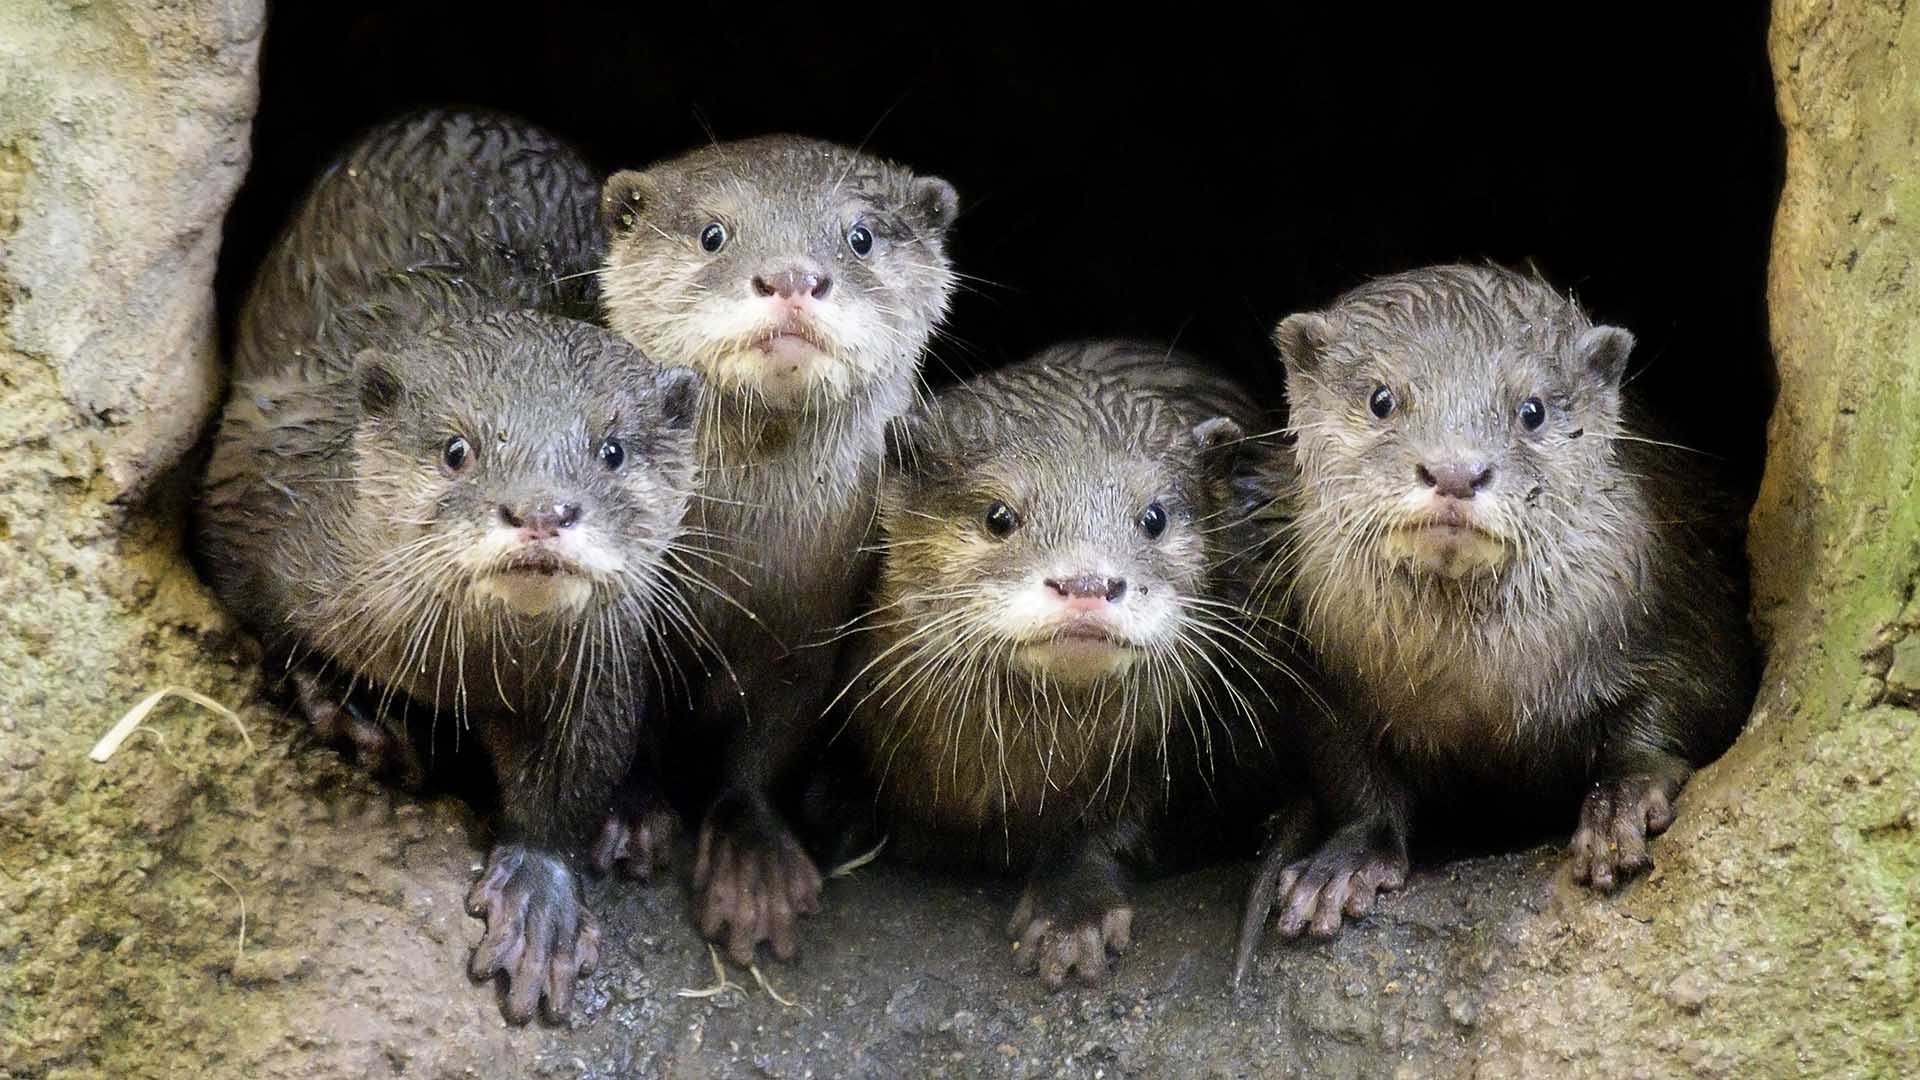 Melbourne Zoo Is Live-Streaming Its Adorable Small-Clawed Otters 24/7